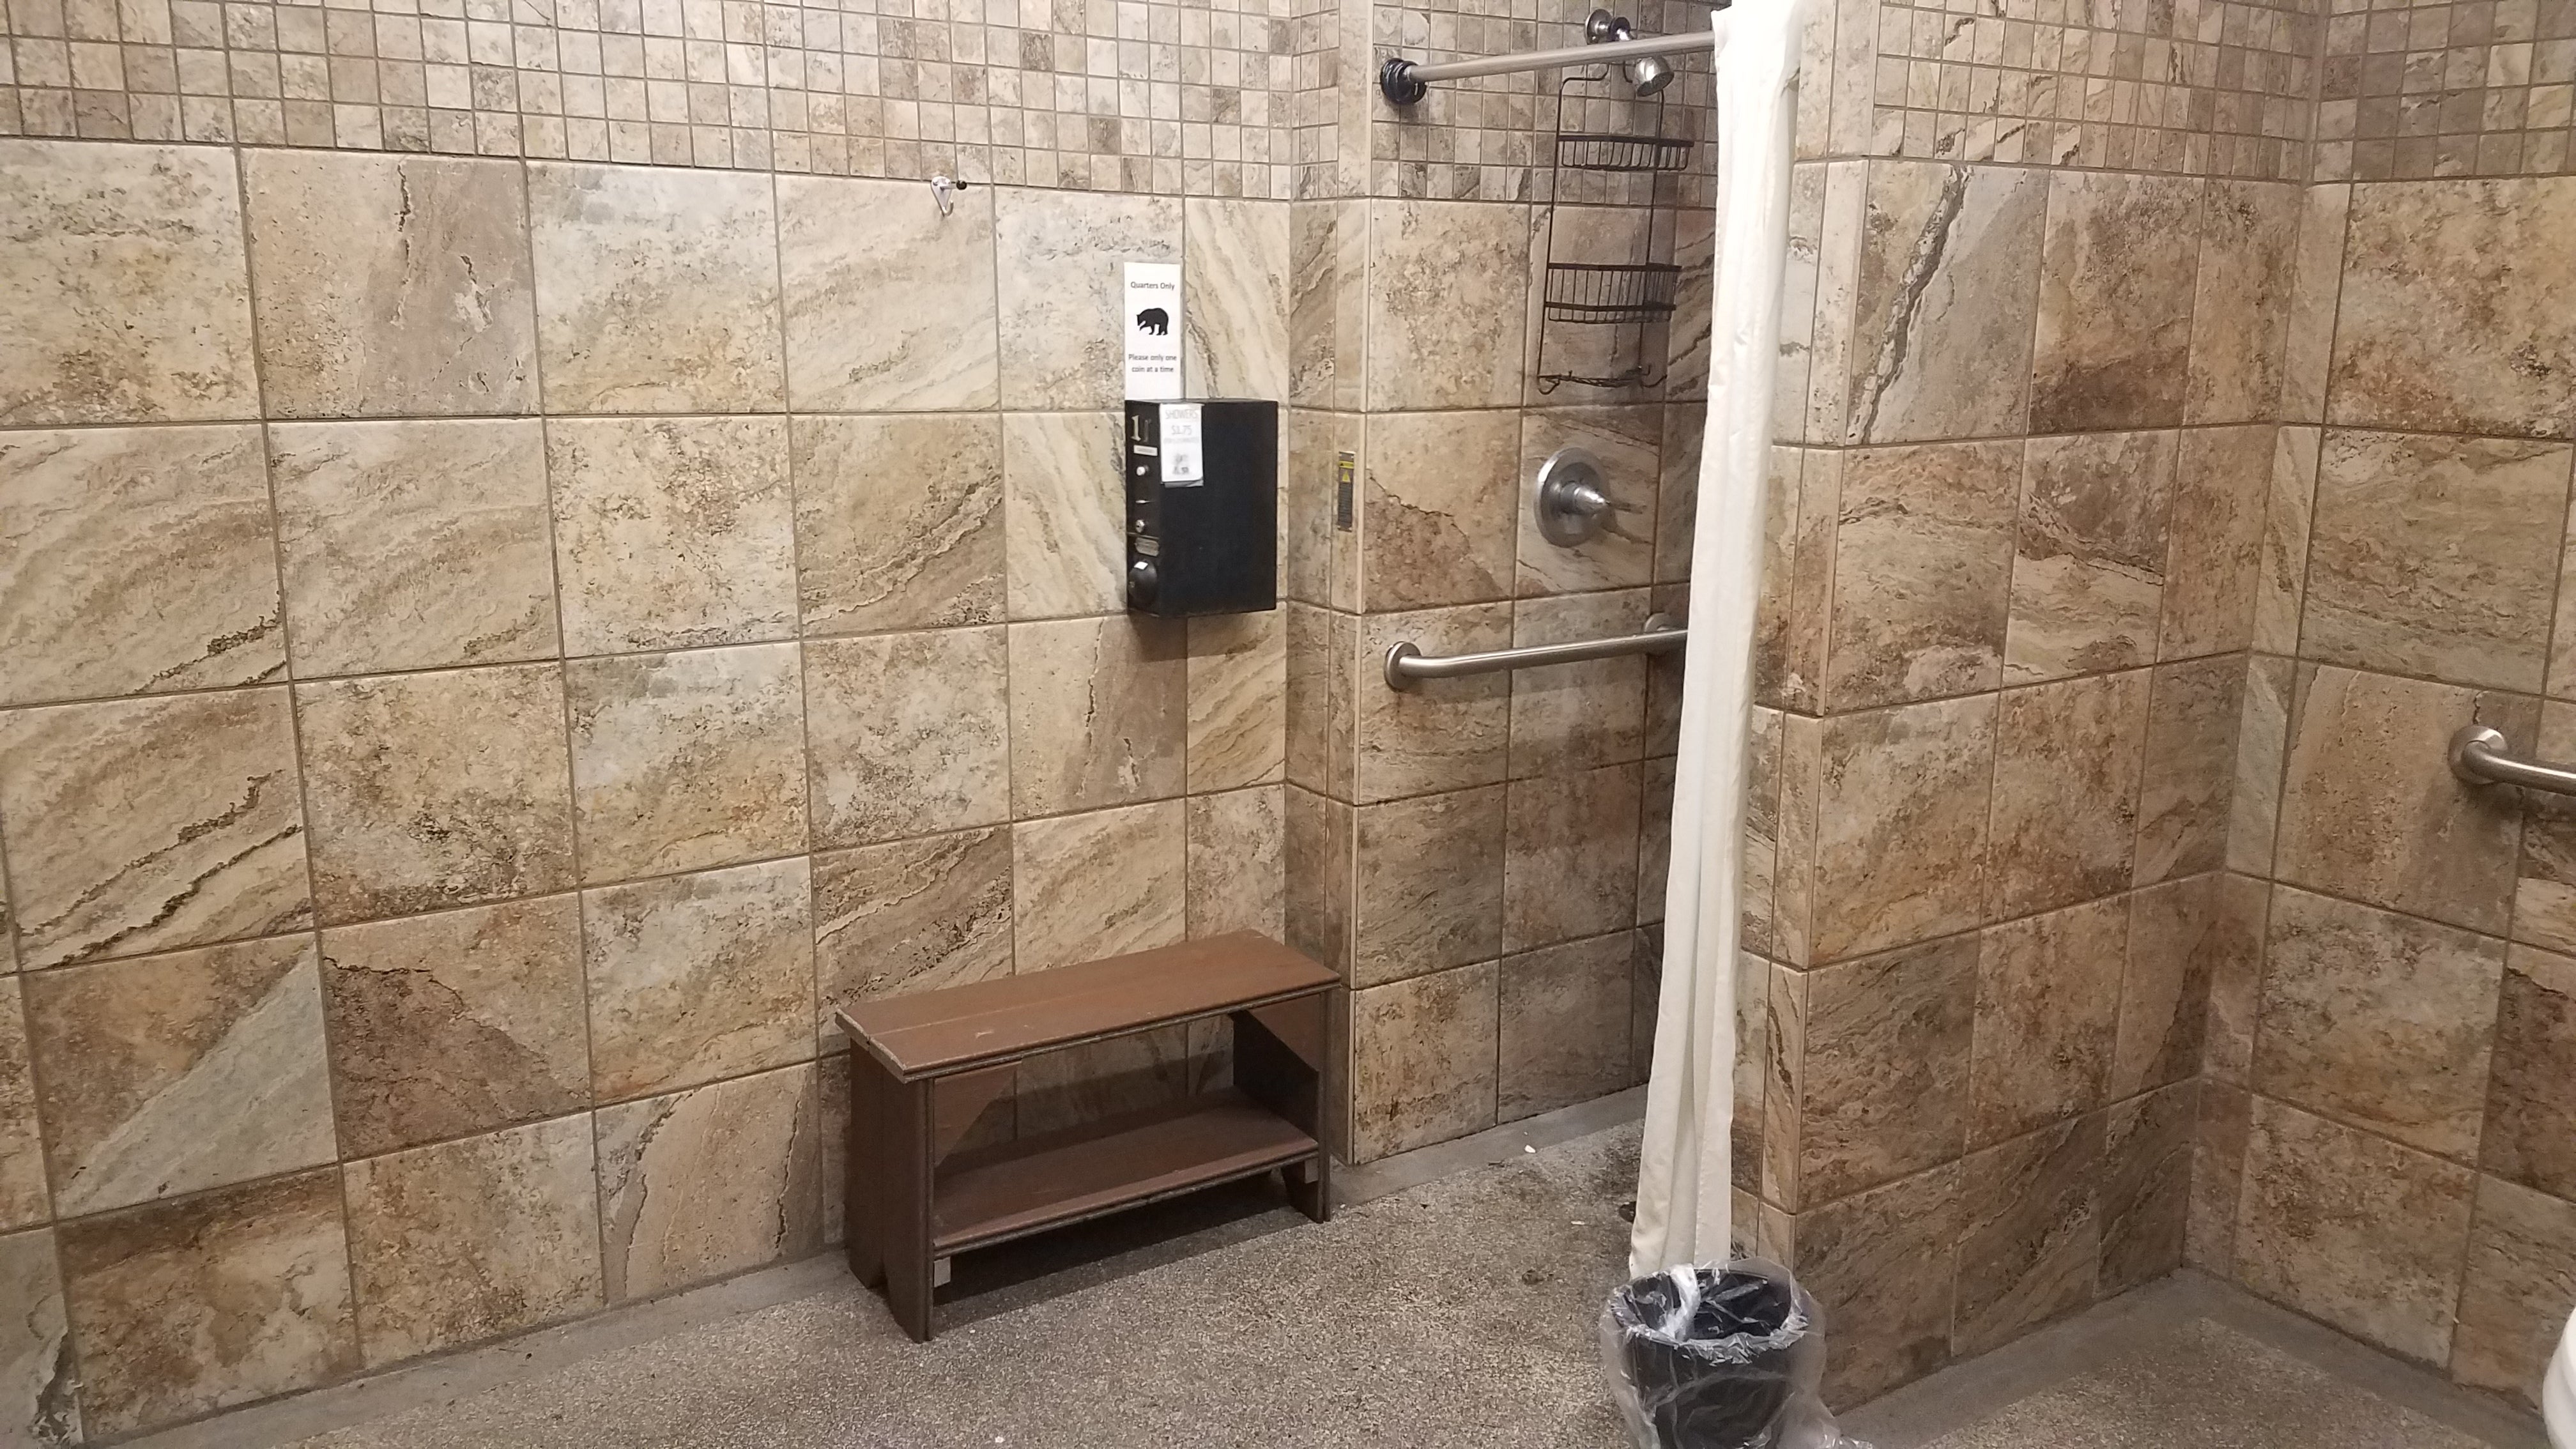 This is a spacious handicapped accessible shower, sink and toilet.